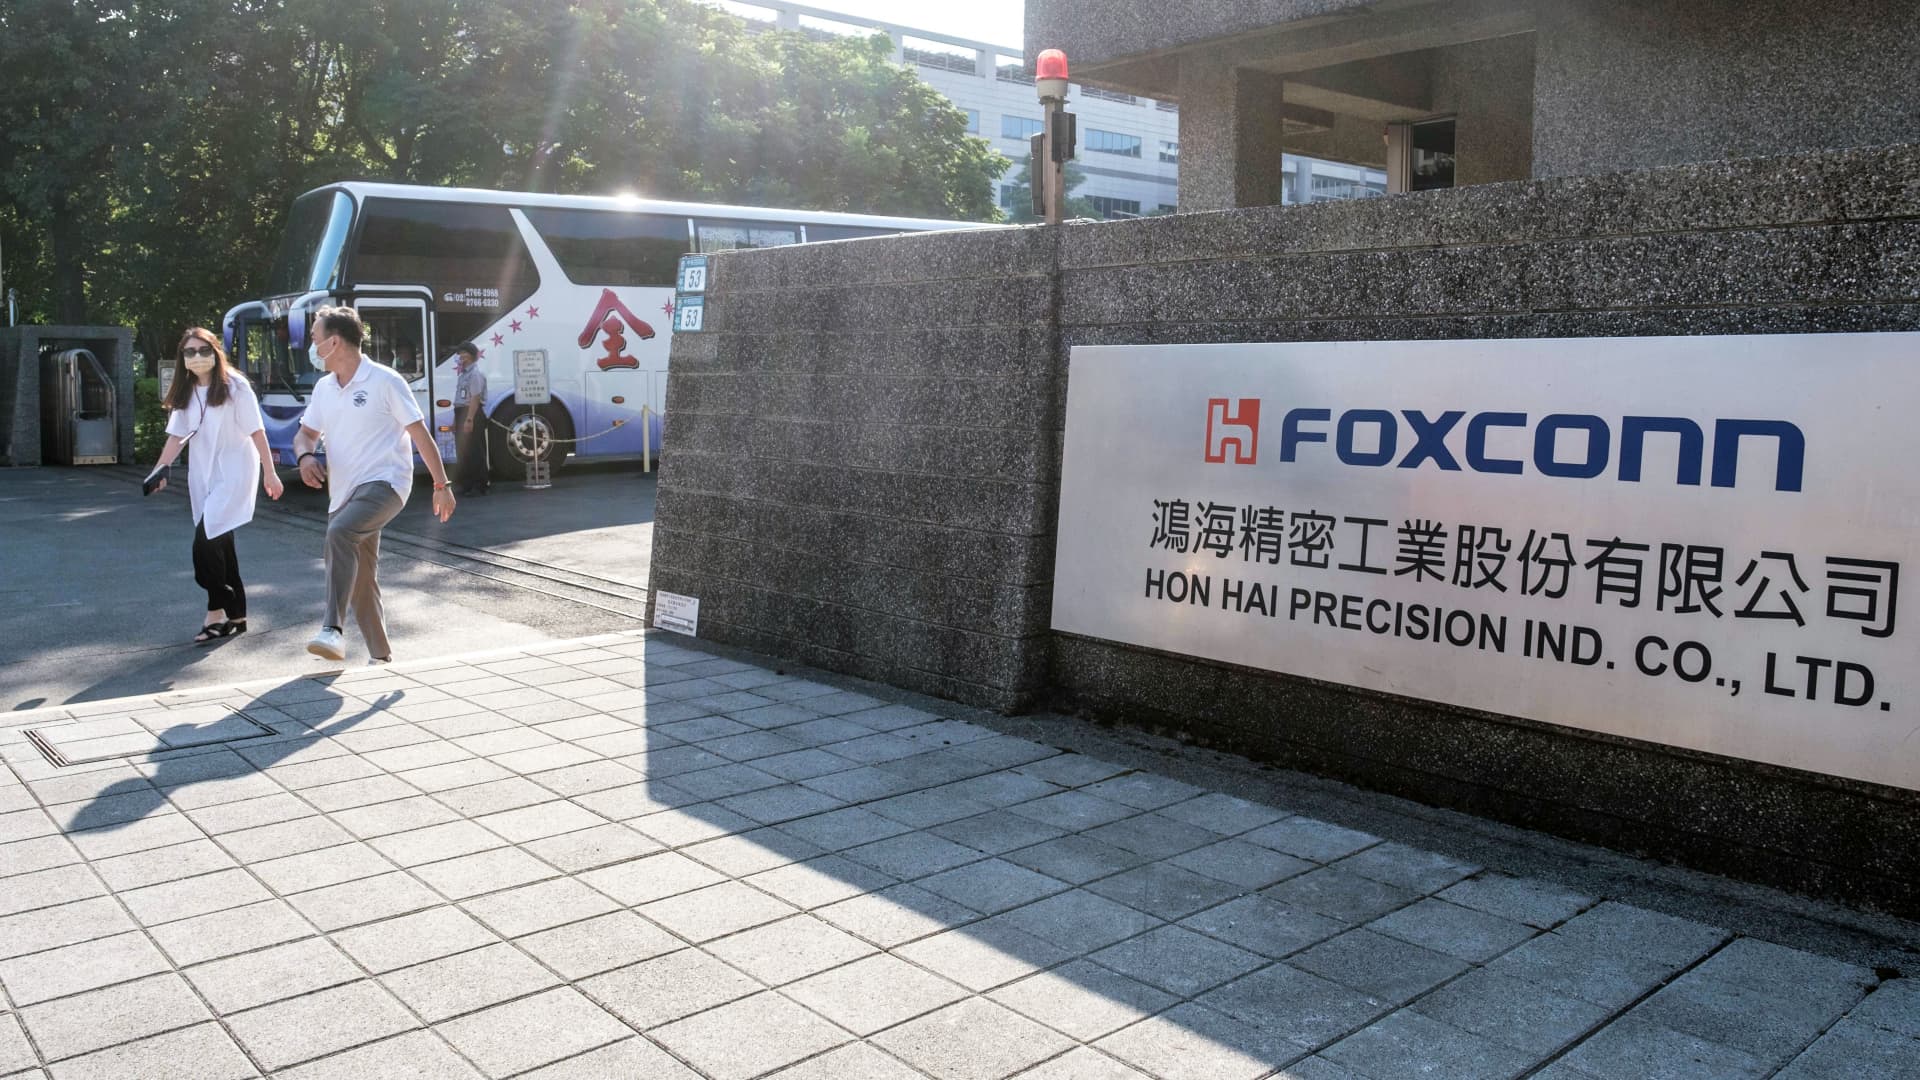 Apple supplier Foxconn cautious on outlook as smartphone sales slow